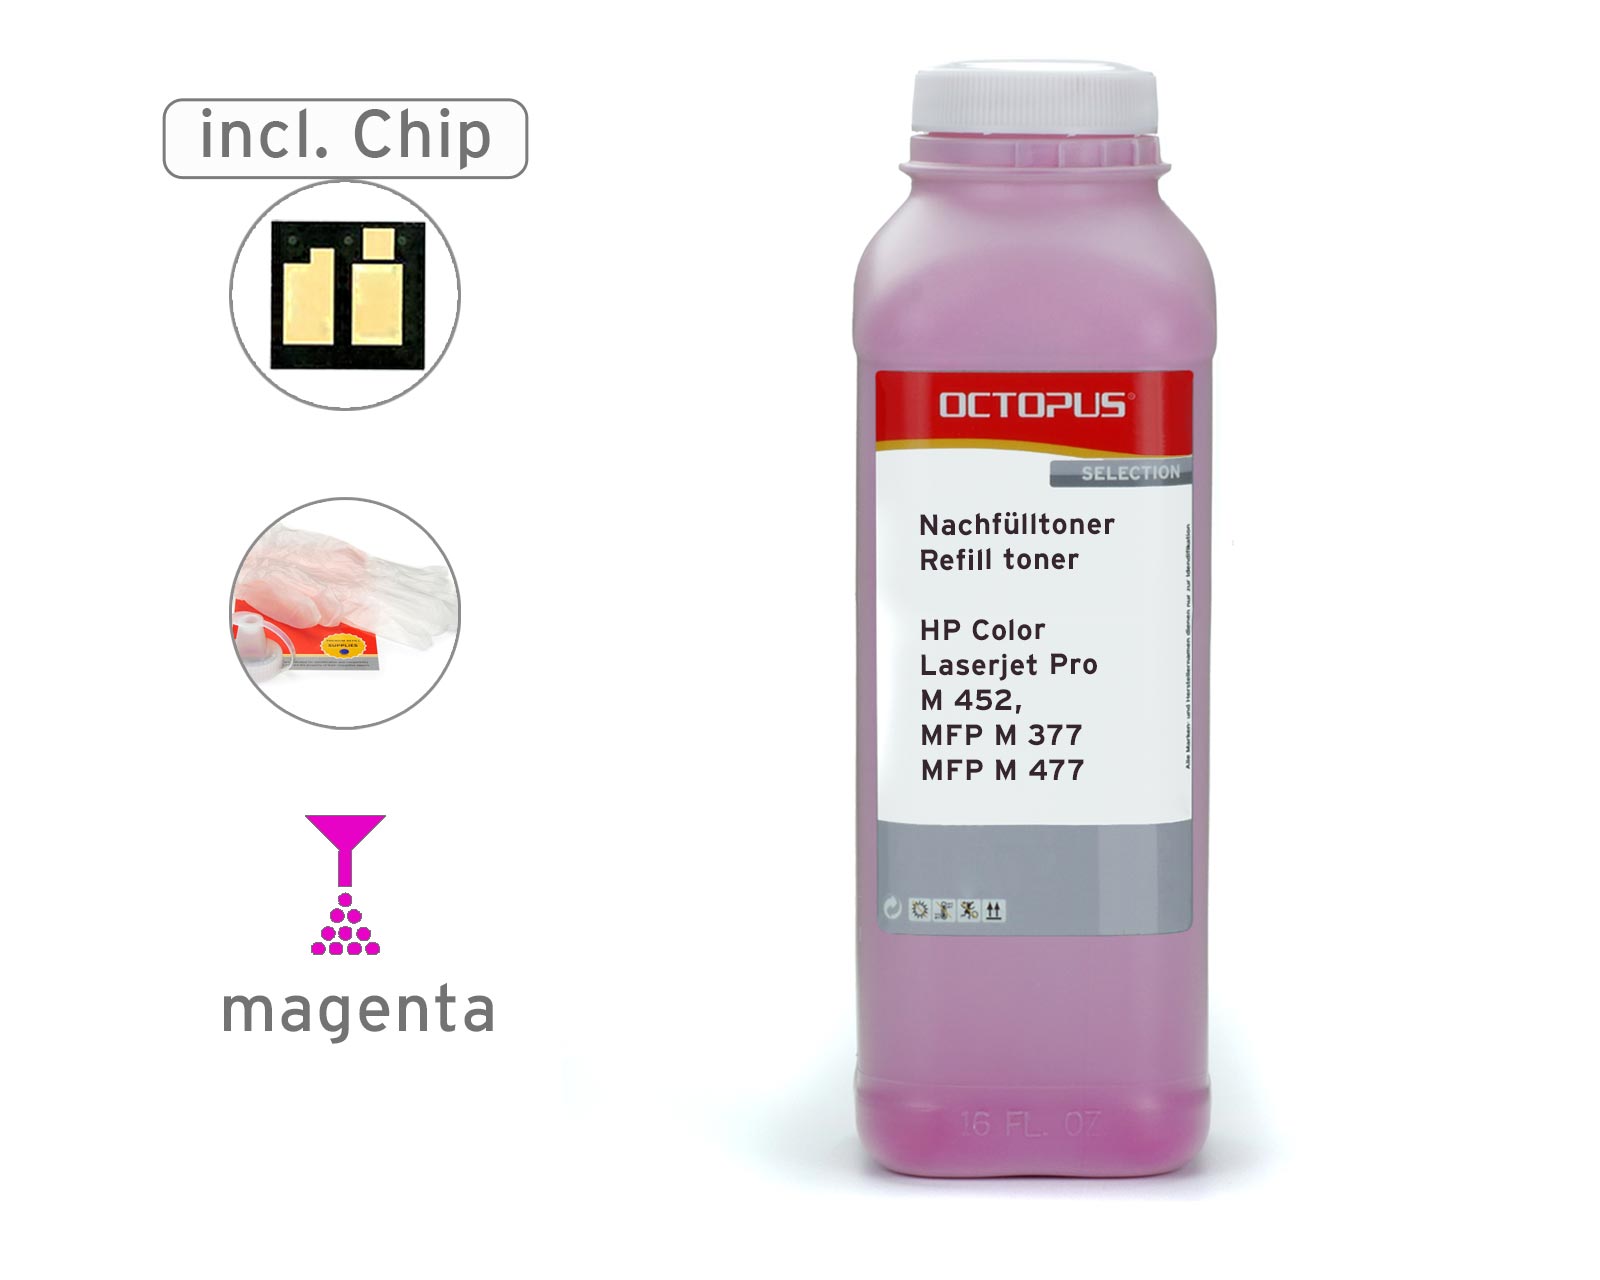 Refill toner set with chip for HP Color Laserjet Pro M 452, MFP M 377 and MFP M 477, magenta